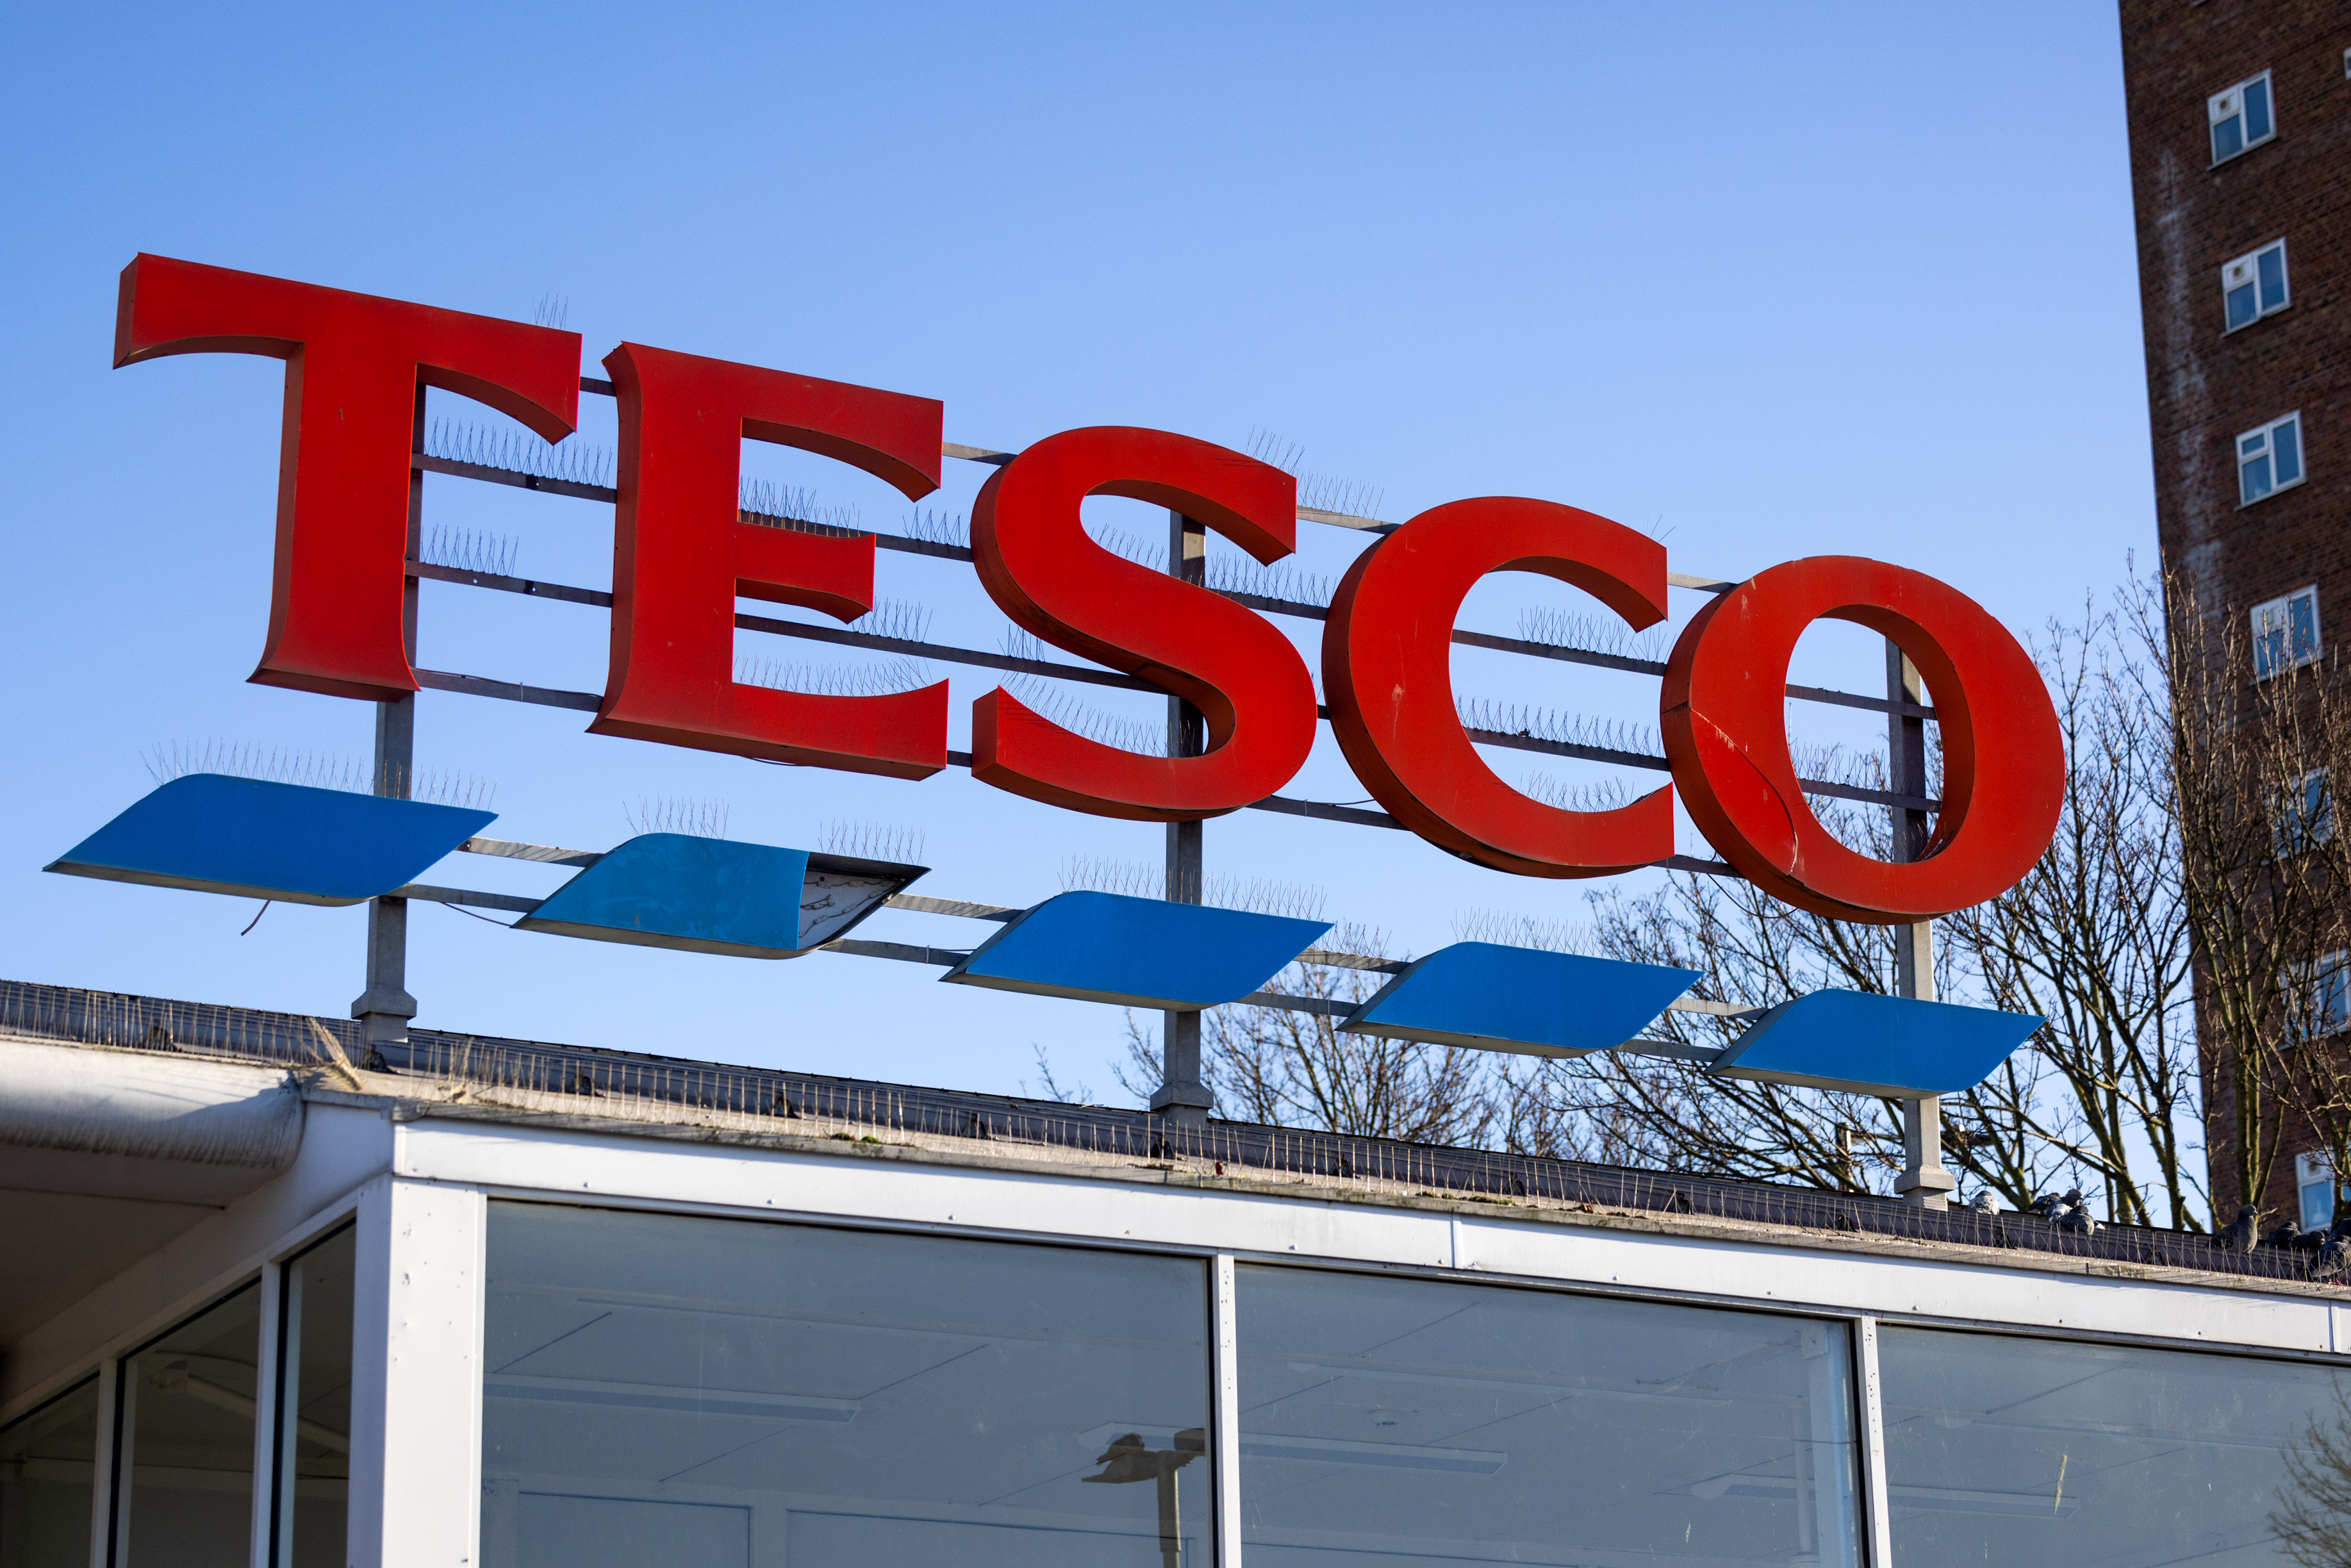 Tesco Raises Profit Outlook After Record Christmas Sales - Bloomberg